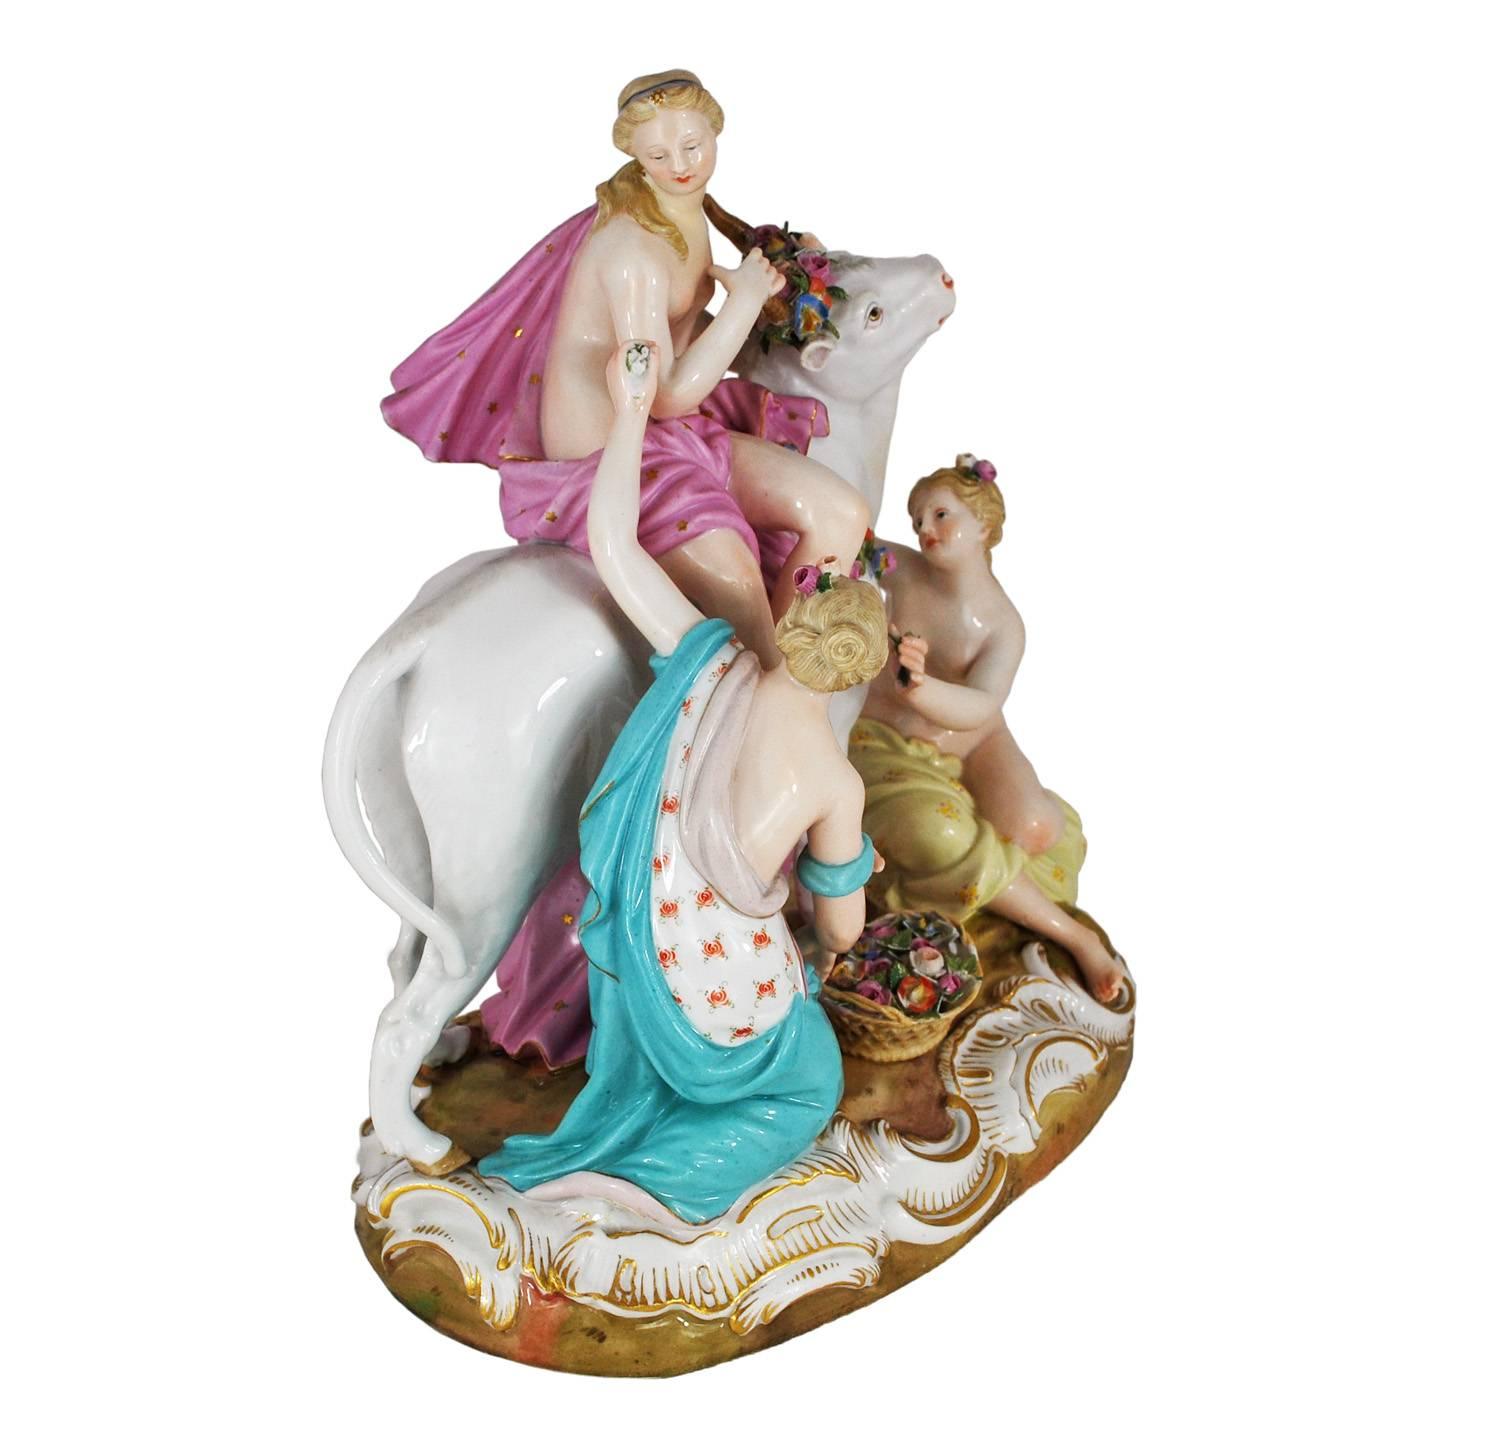 This famous porcelain group depicts the myth of Europa being captivated by Zeus in the form of a beautiful white bull. Meissen's renowned artists capture every detail in full, gorgeous color. Some of the piece's stunning features include: intricate